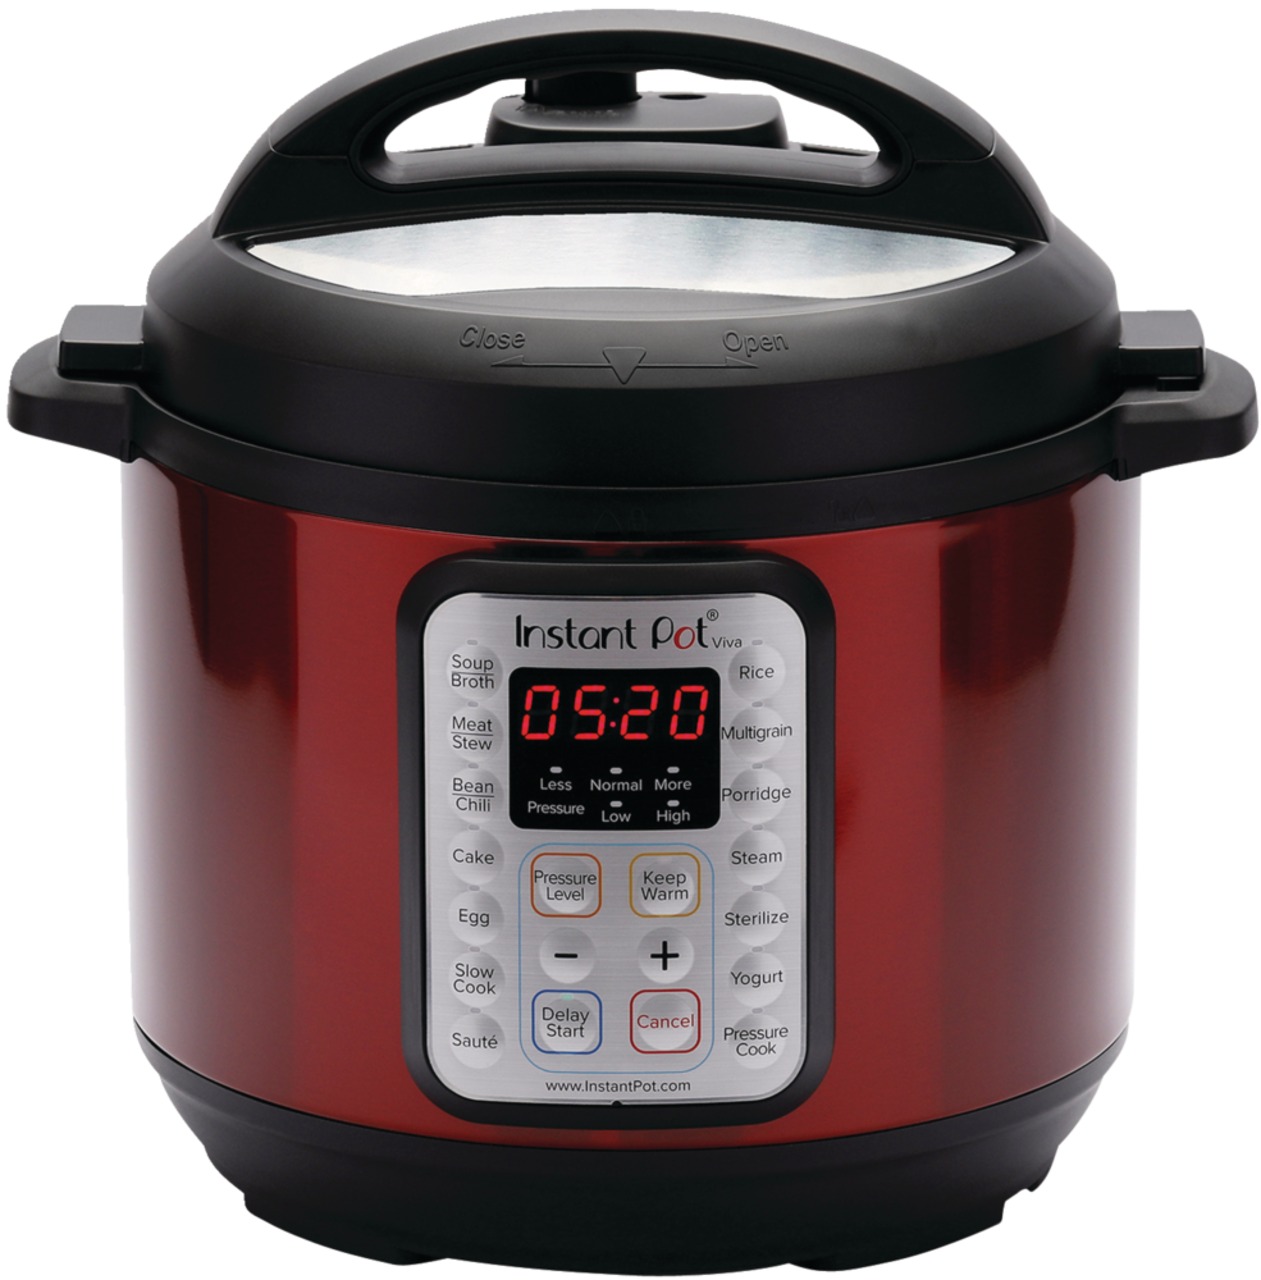 https://media-www.canadiantire.ca/product/living/kitchen/kitchen-appliances/3993904/instant-pot-viva-red--3f508d66-c4b8-41c0-a51a-af7ddf165733.png?imdensity=1&imwidth=1244&impolicy=mZoom